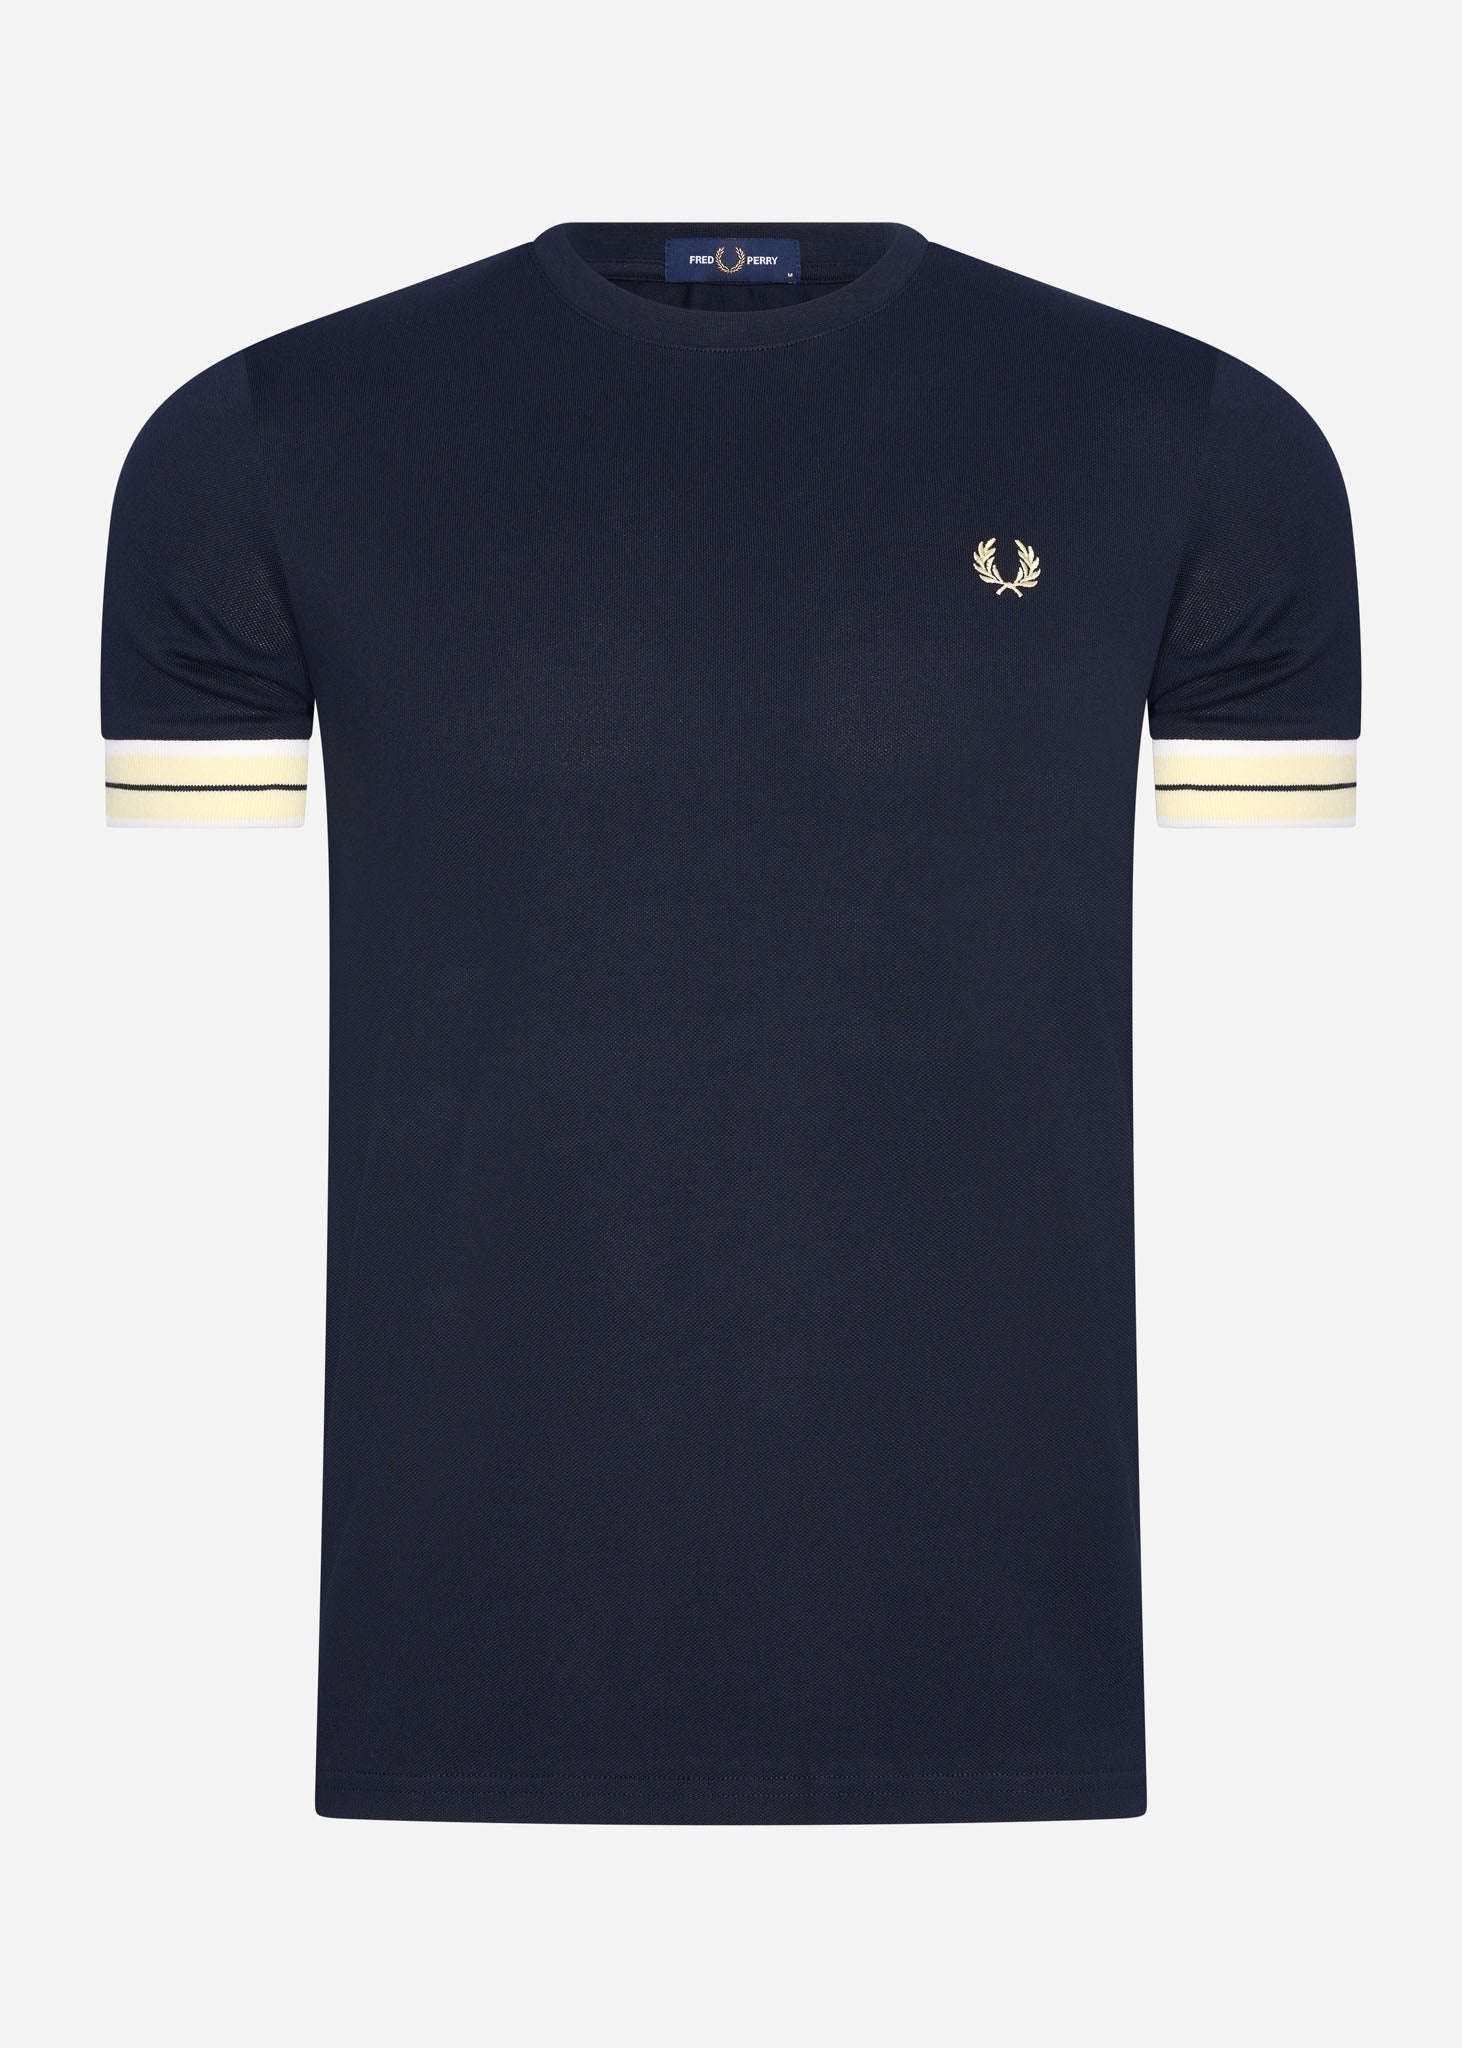 fred perry t-shirt pique navy 